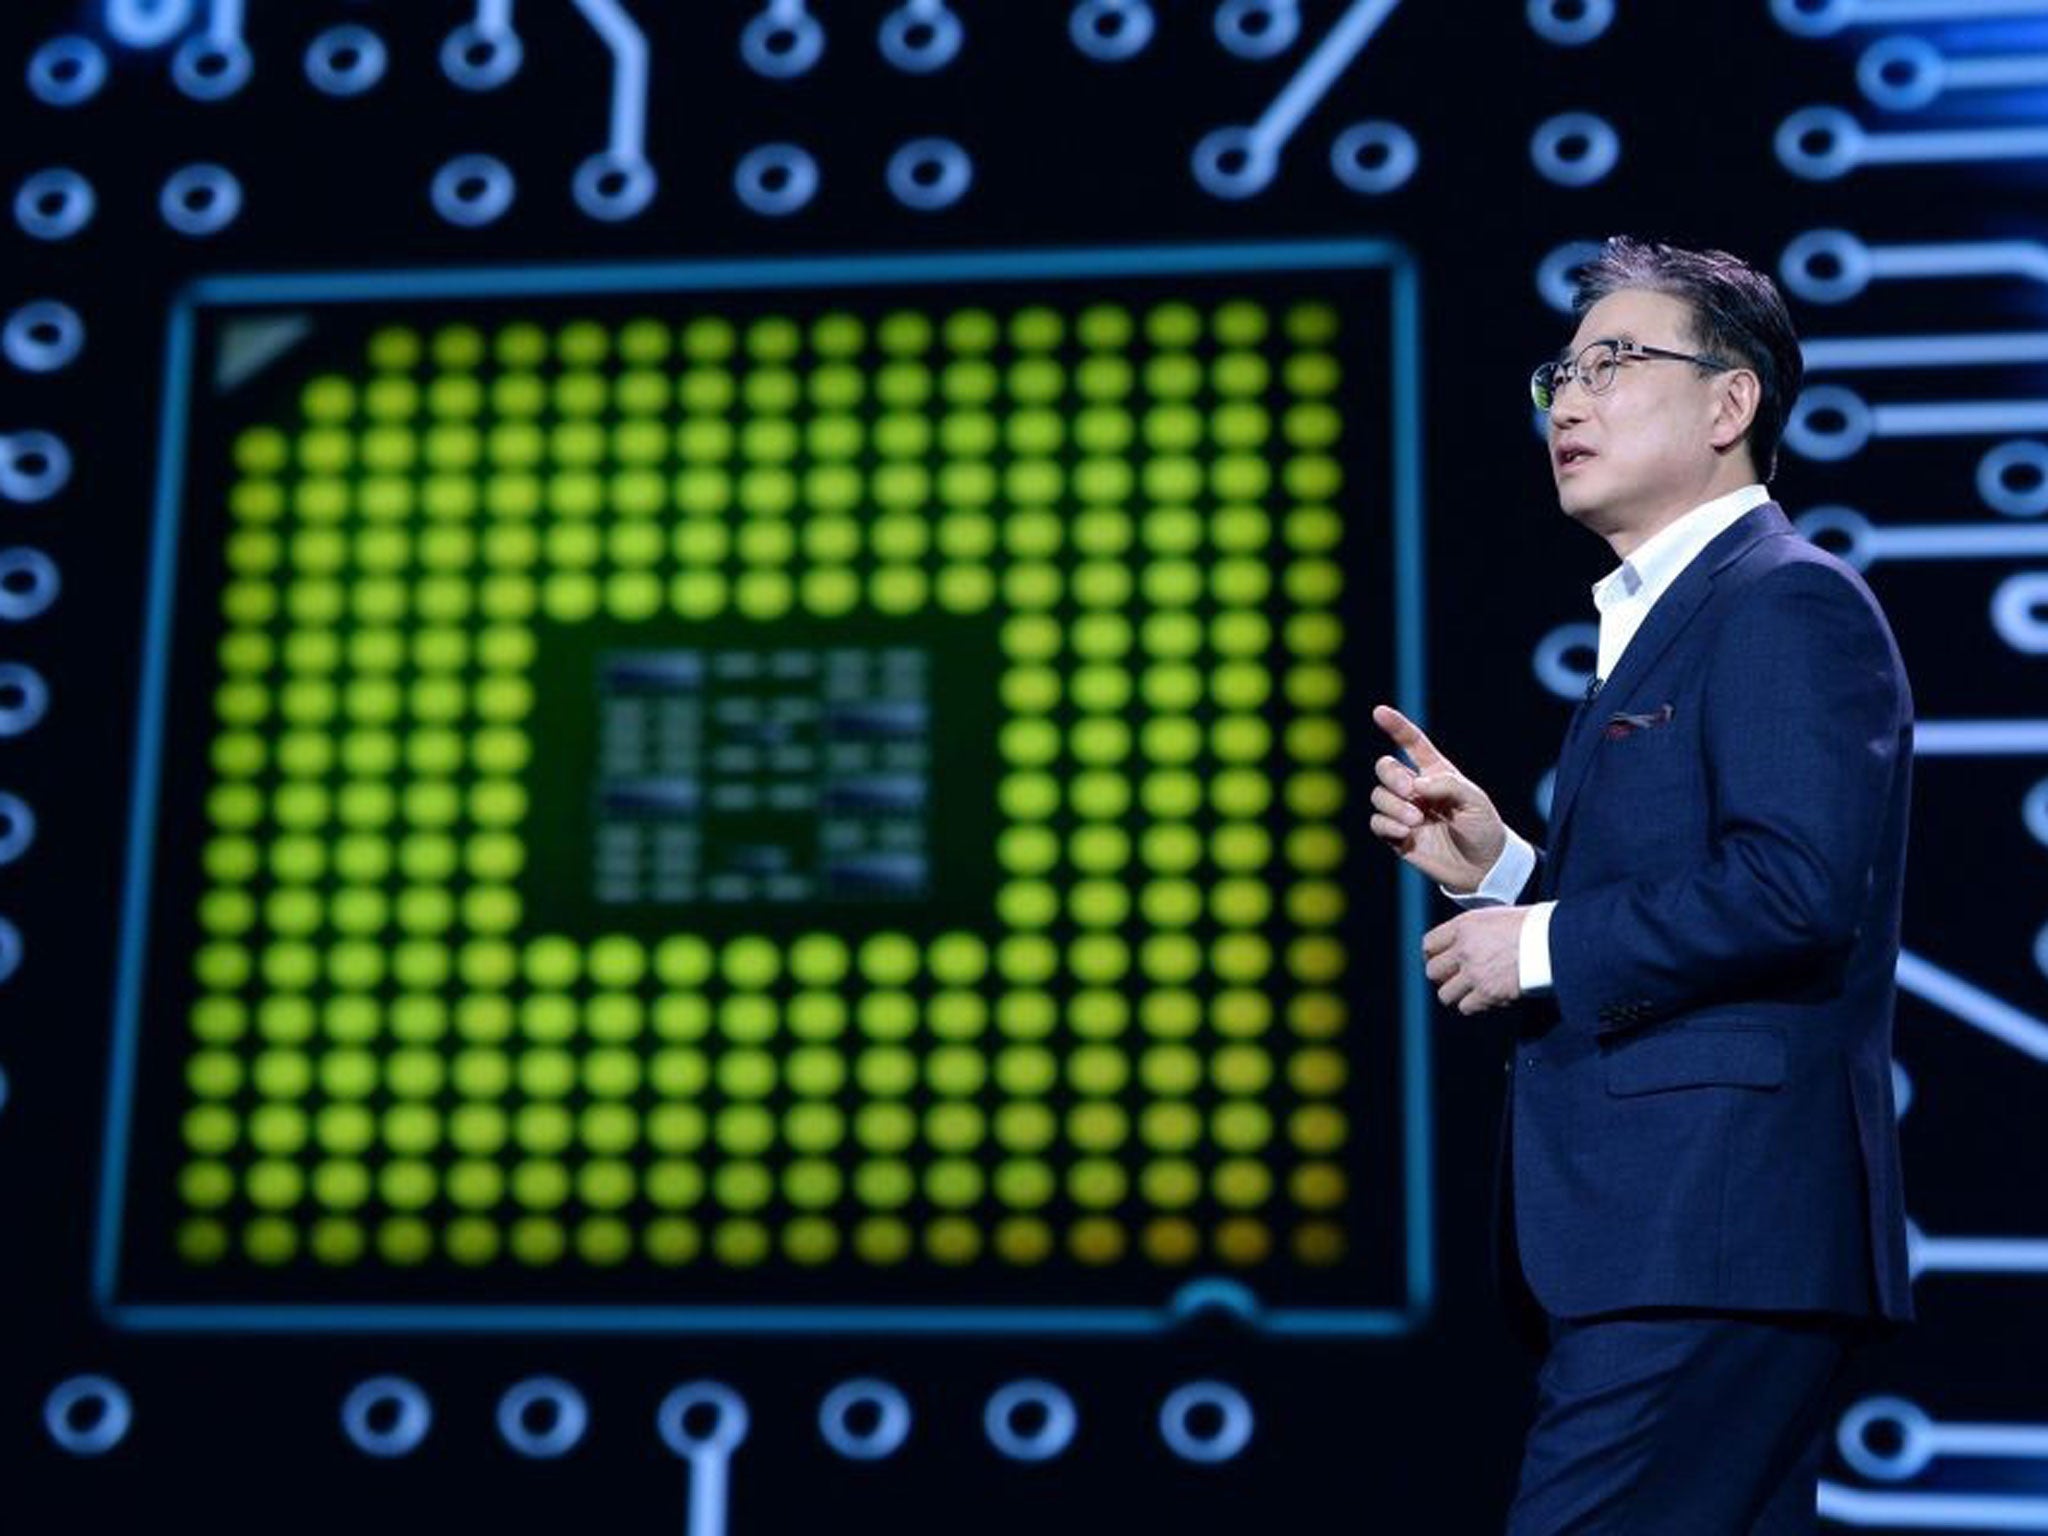 President and chief executive of Samsung Electronics, Boo-Keun Yoon, speaks during the Samsung keynote at the 2015 International Consumer Electronics Show (CES) in Las Vegas, Nevada, USA